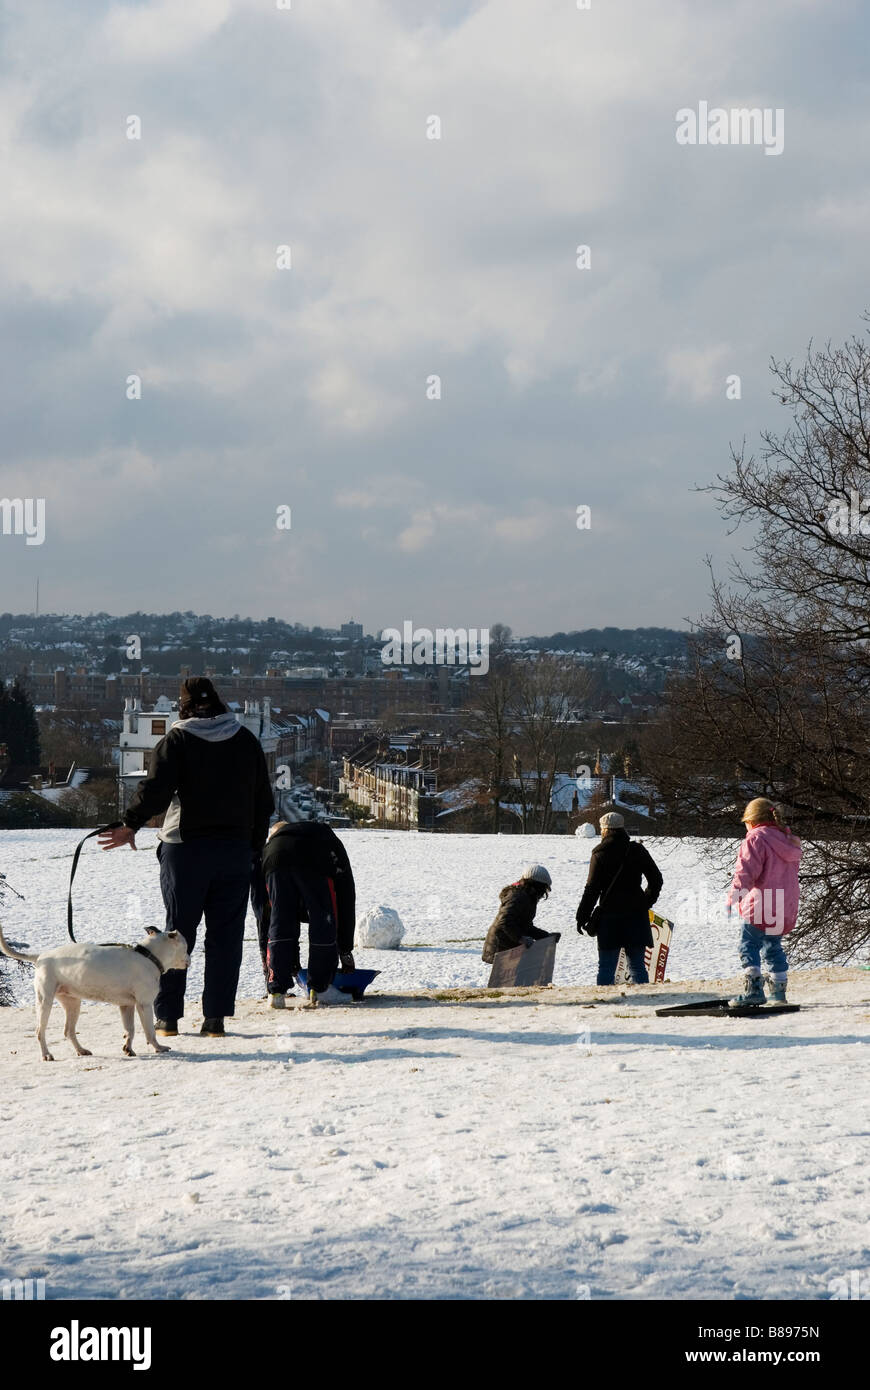 People ride in a sledge in the snow down the hill in a park, on winter day, London England UK 2009 Stock Photo